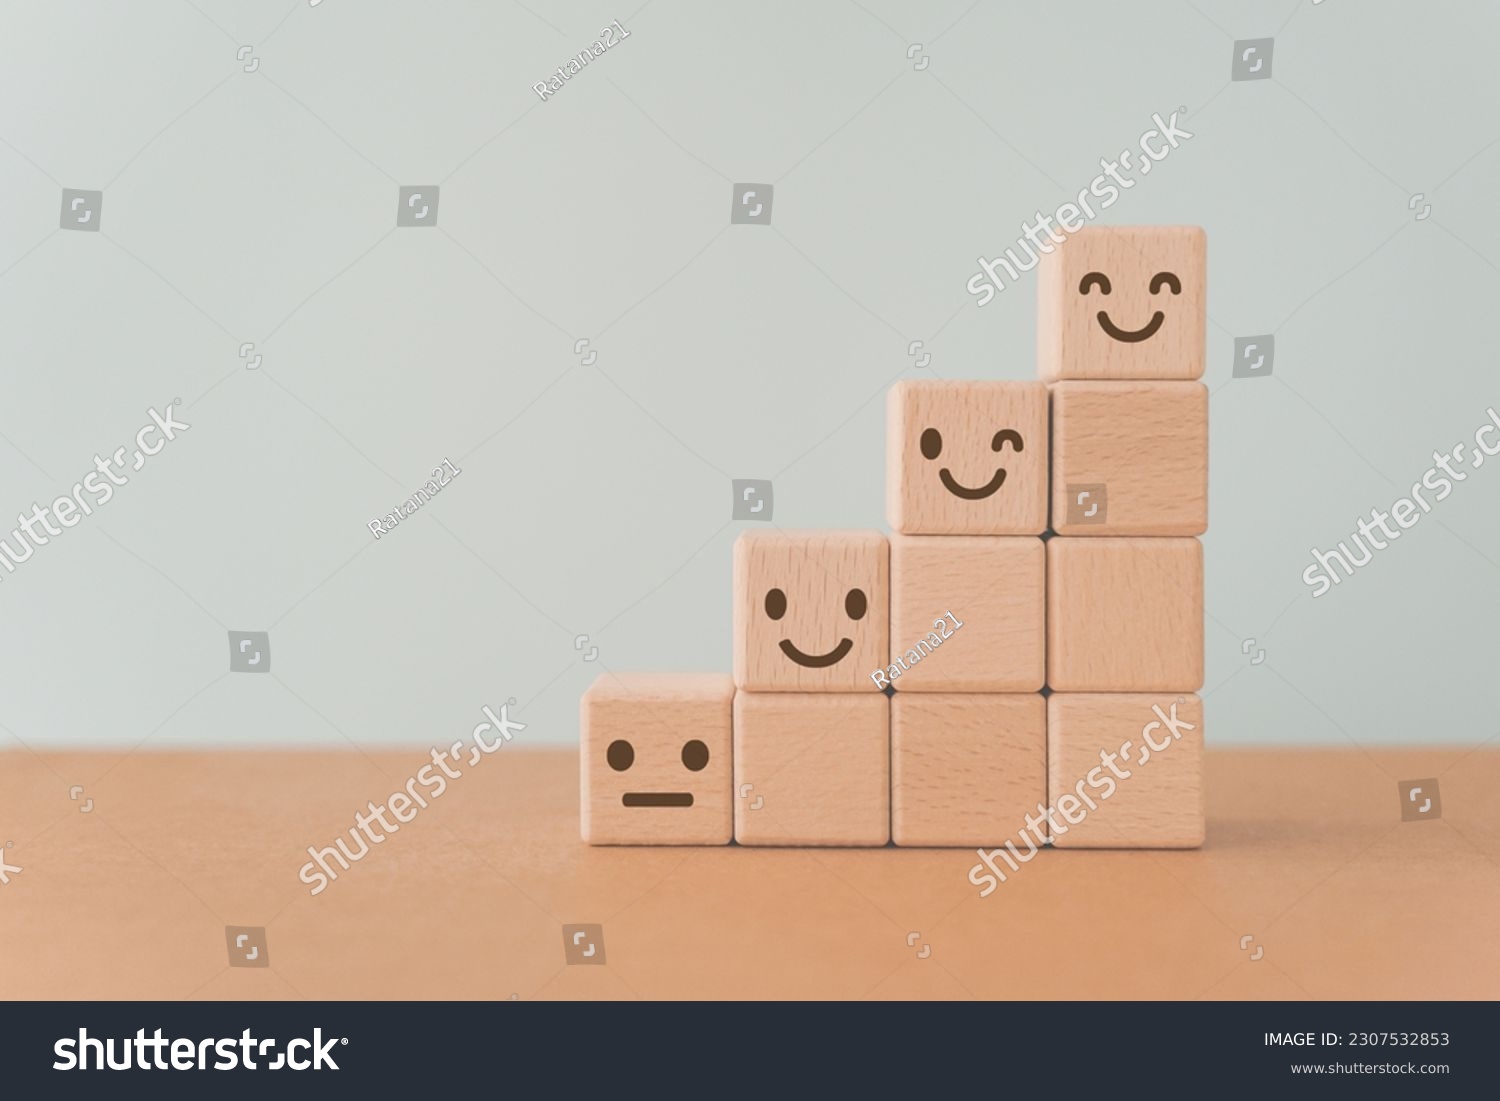 For positive thinking, added value, benefits, additional, personal development, growth mindset, positive thinking, opportunities,  mental heath concept. emoticon face on stack of wooden cube blocks #2307532853